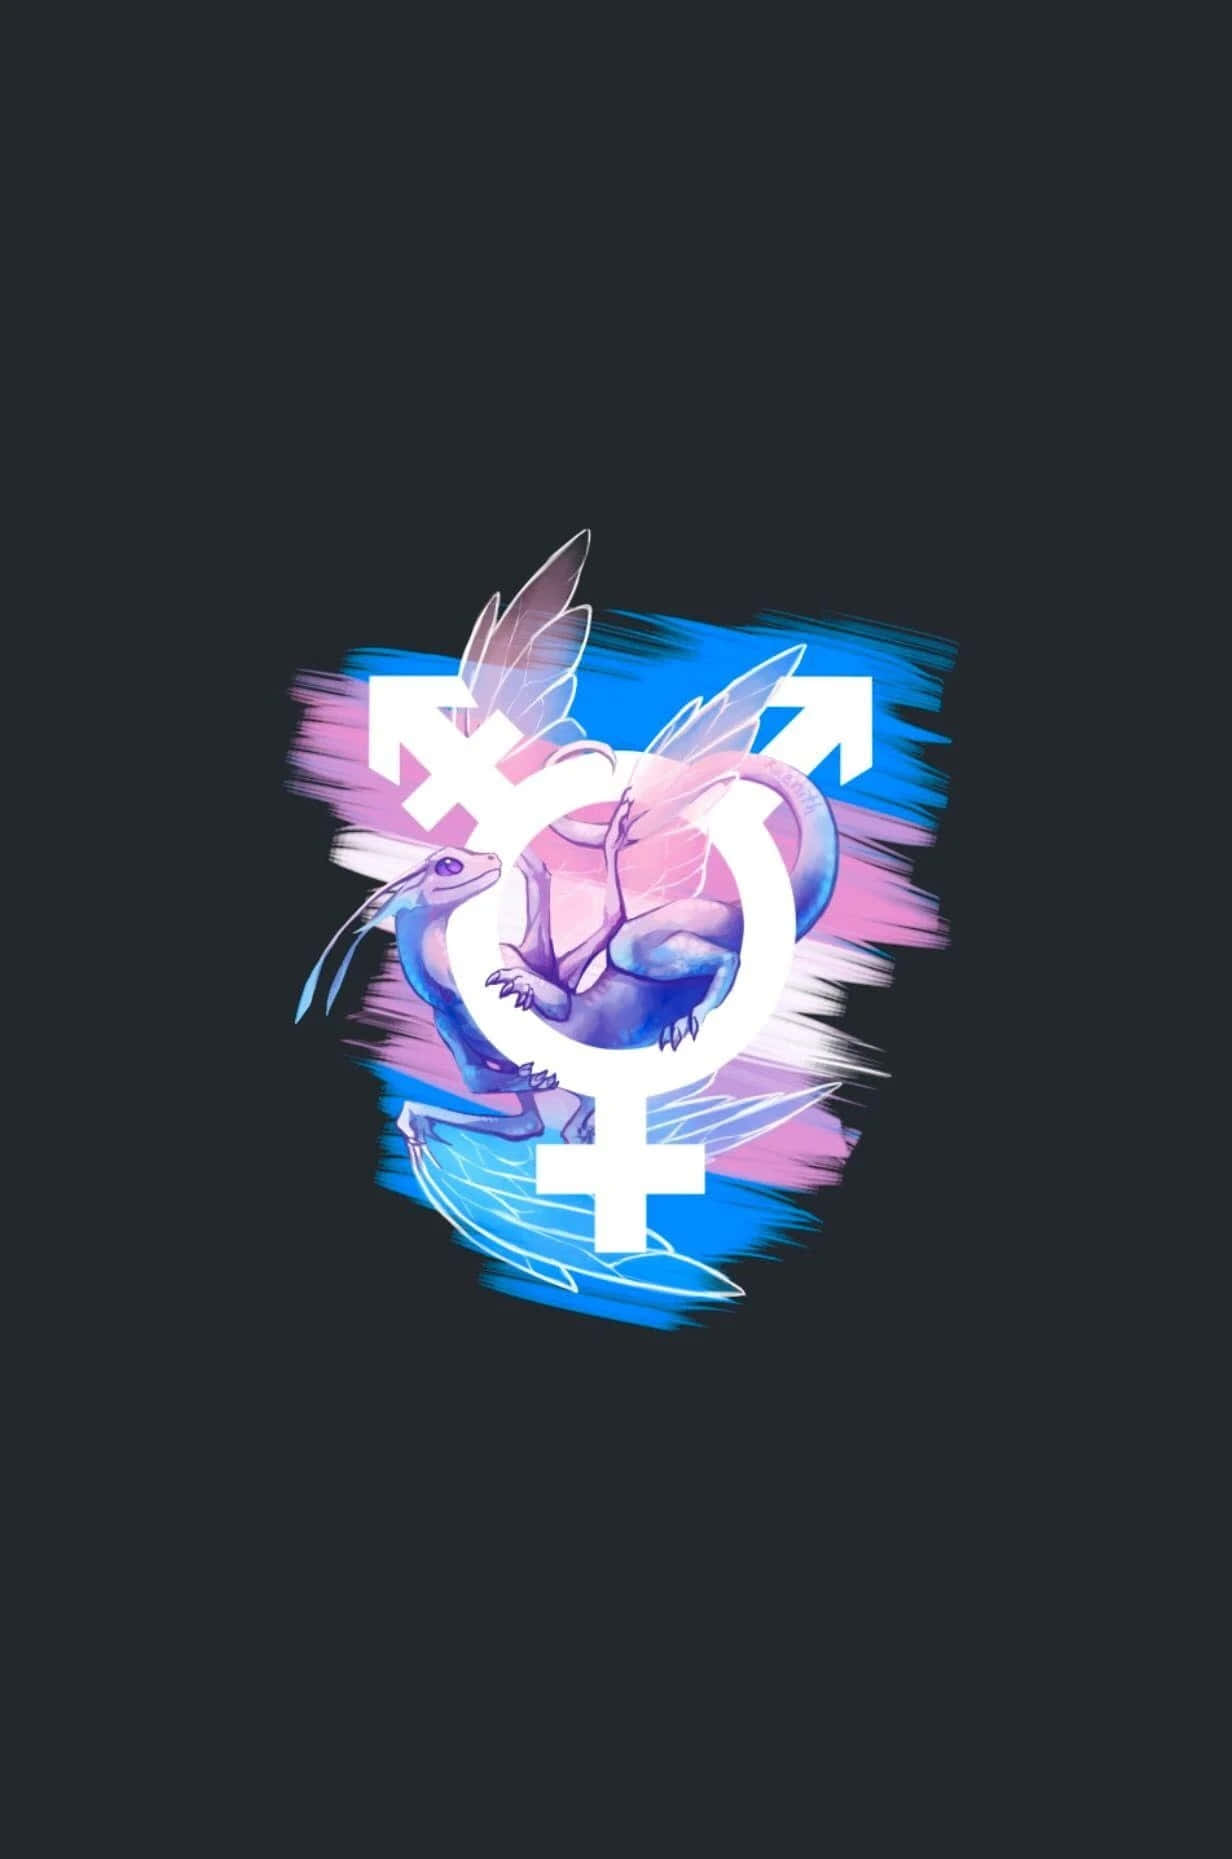 Trans Color And Symbol In Black Background